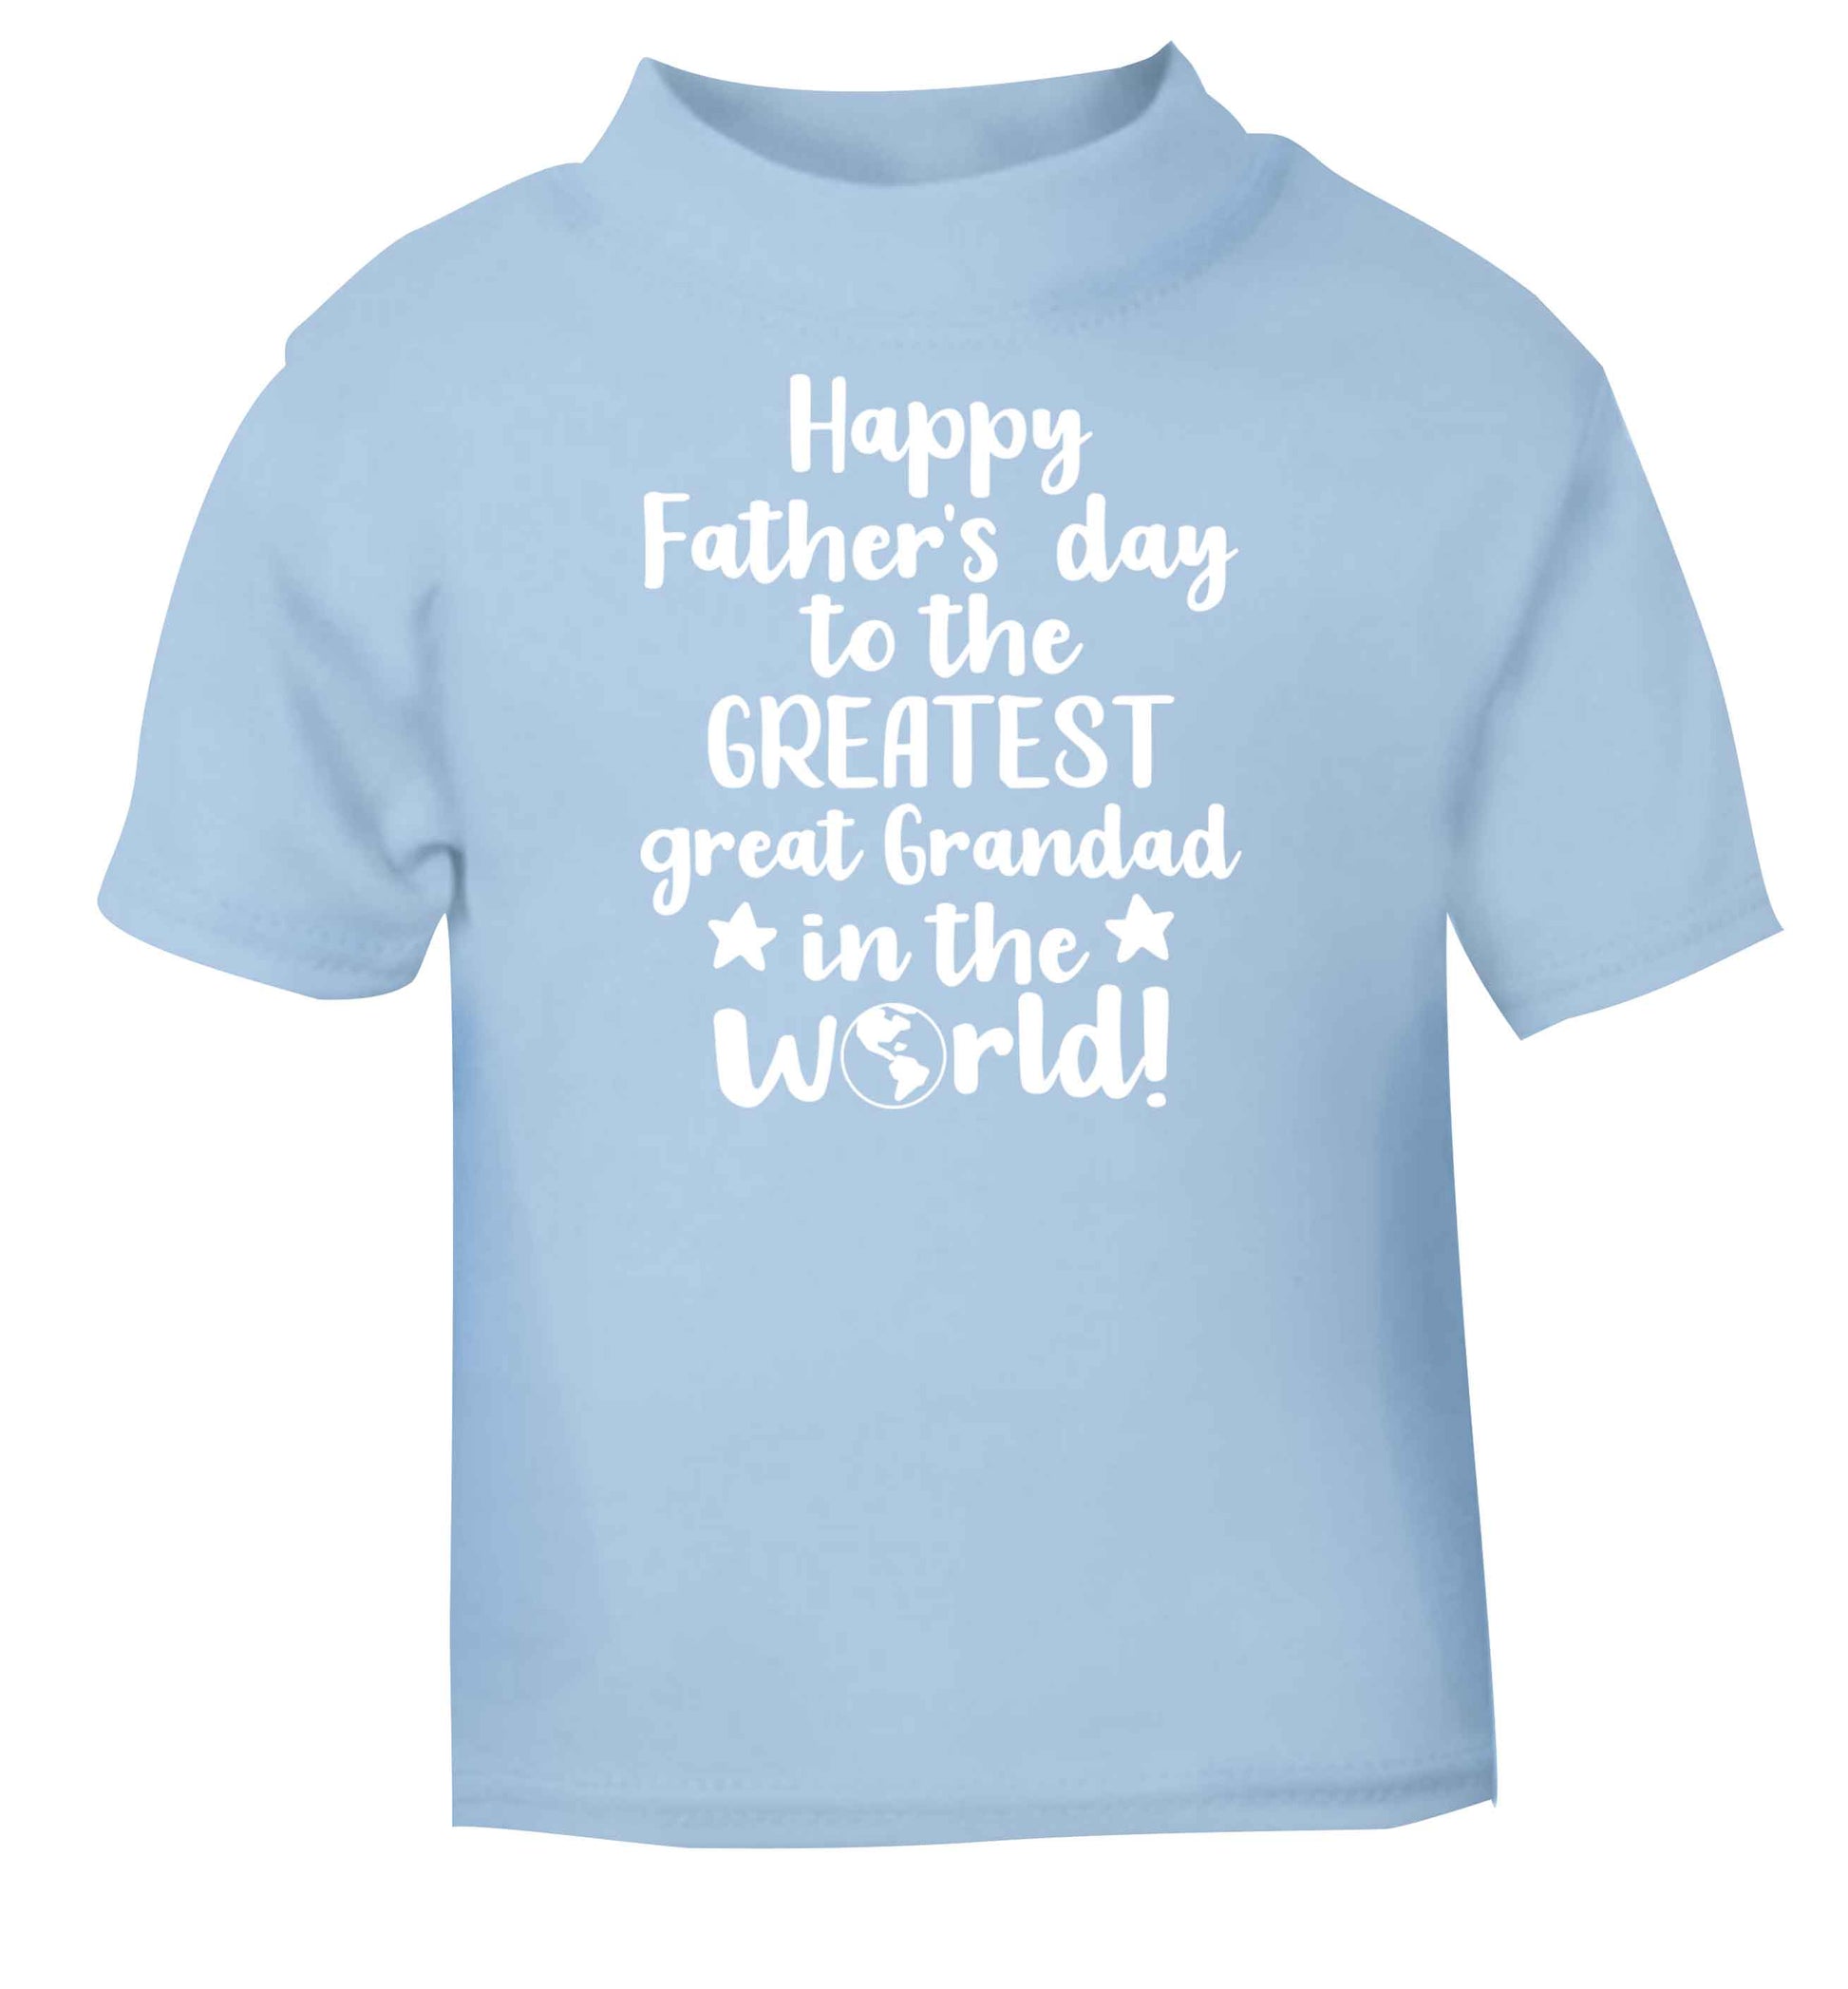 Happy Father's day to the greatest great grandad in the world light blue baby toddler Tshirt 2 Years